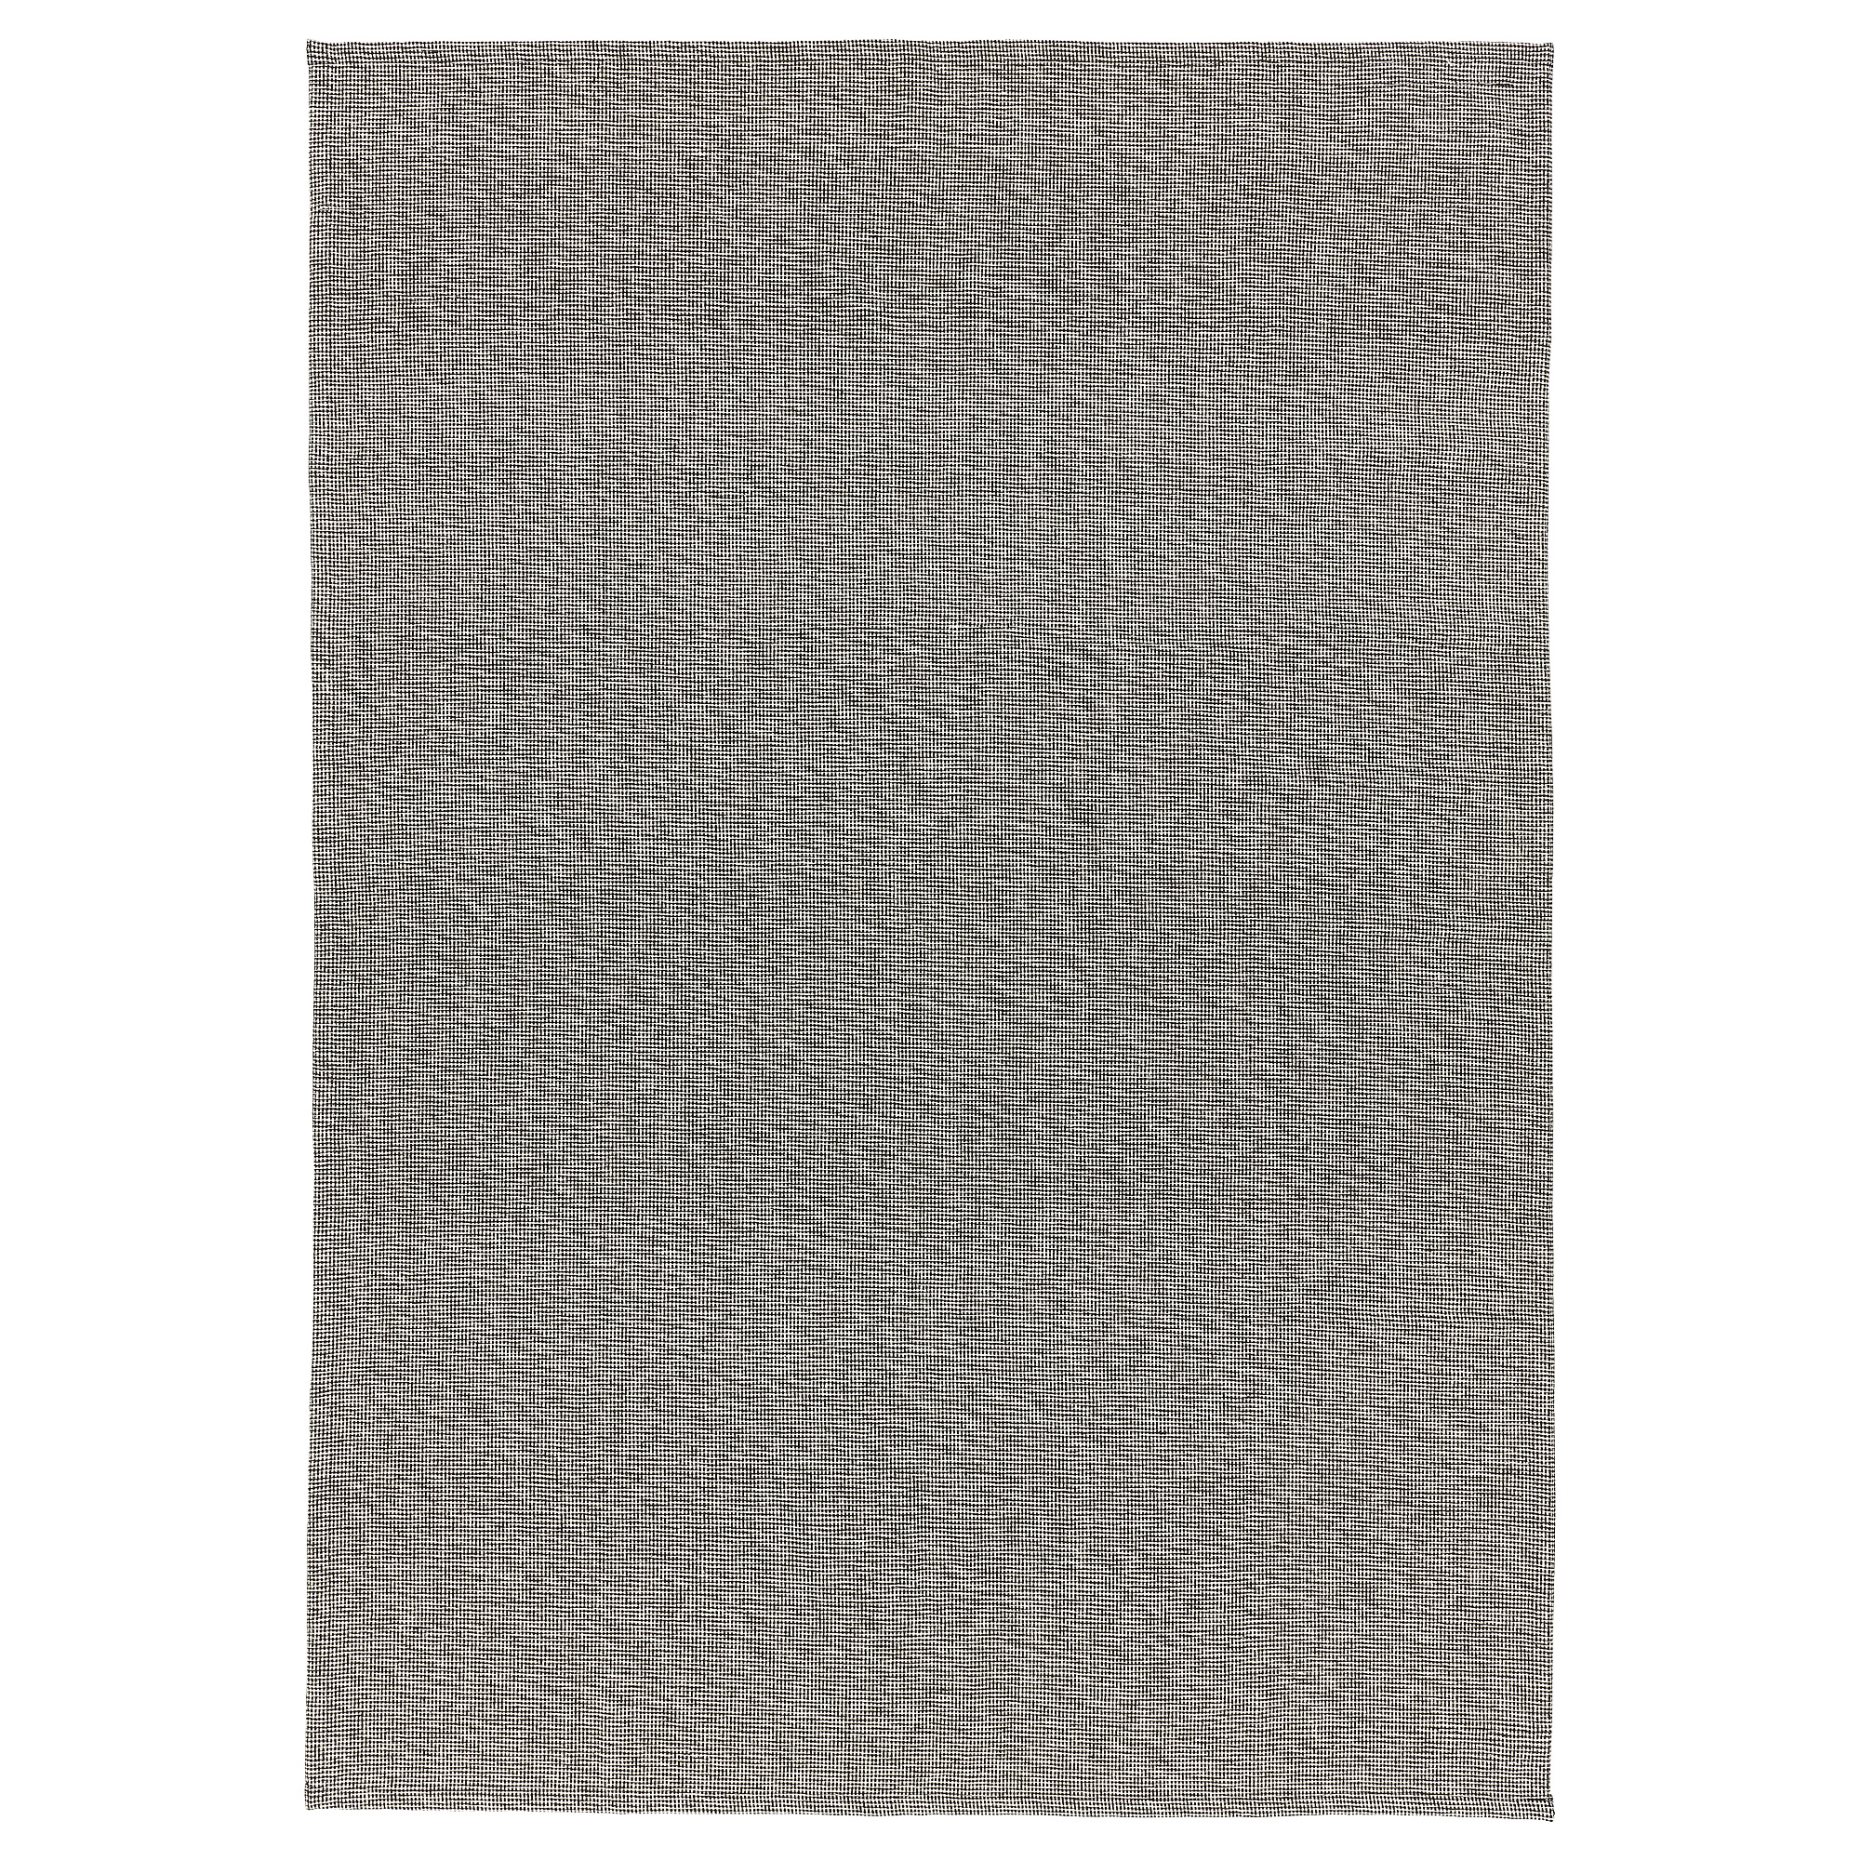 TIPHEDE, rug flatwoven, 155x220 cm, 204.700.47